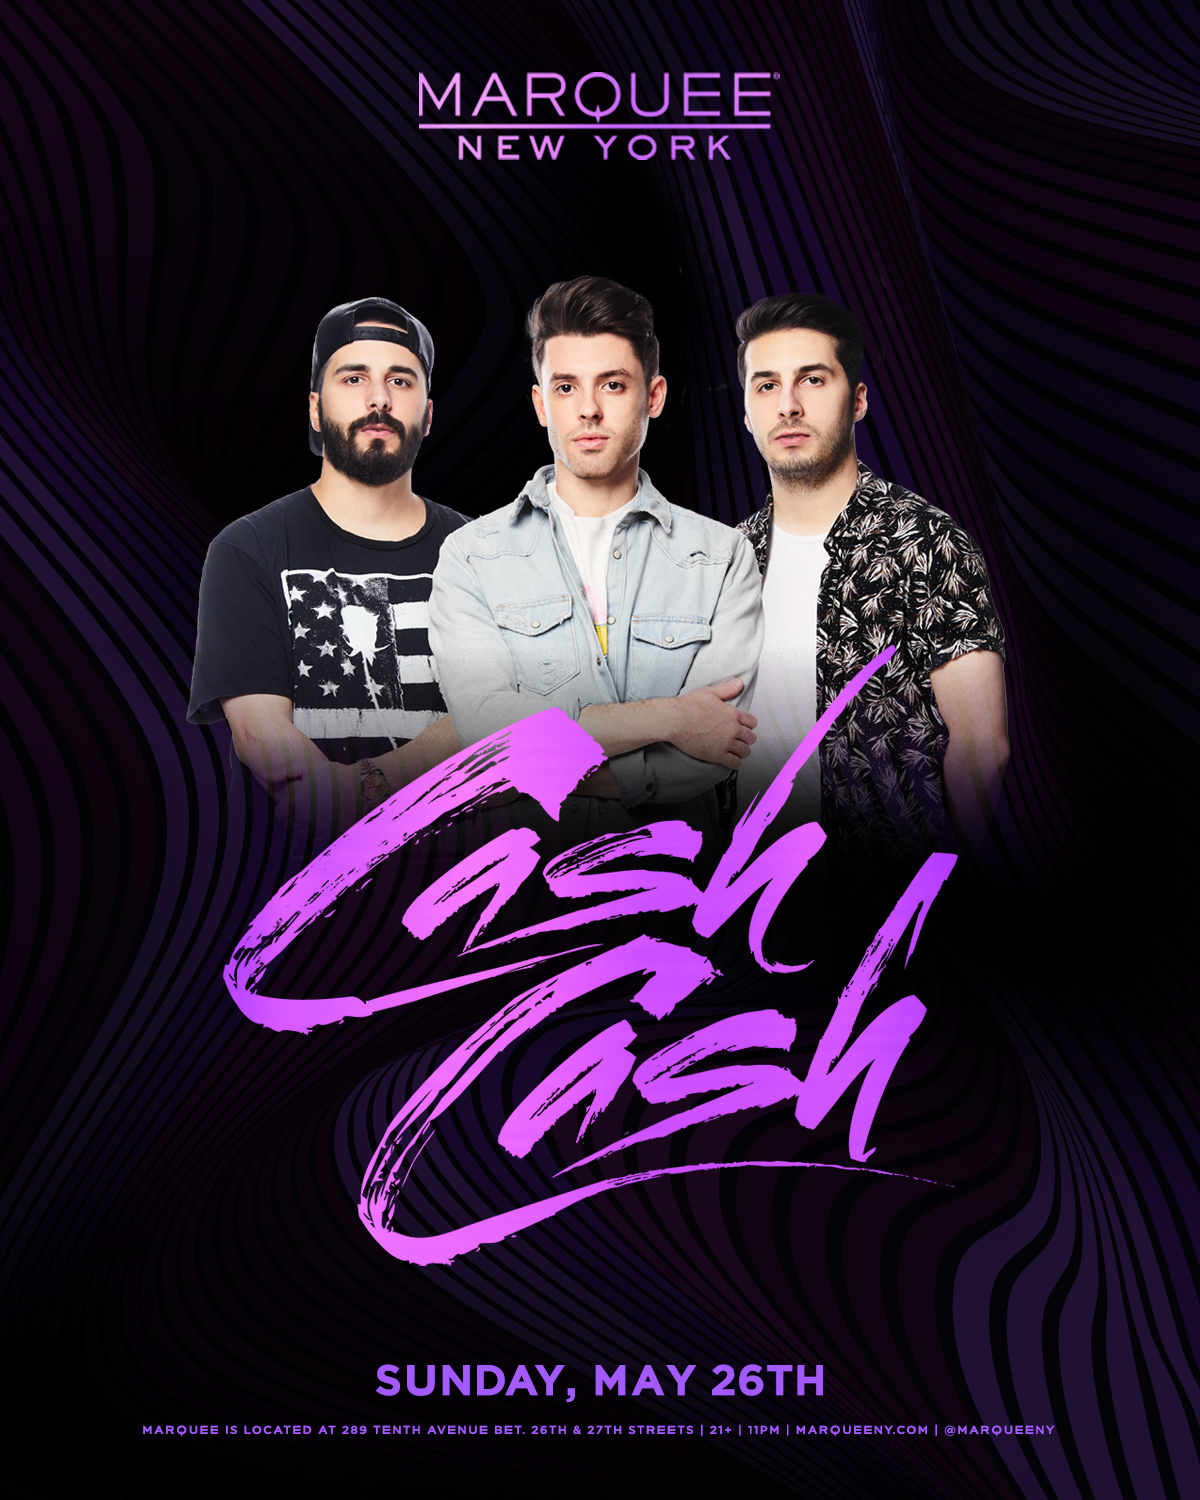 Cash Cash @ Marquee NYC (05-26-2019) (New York, NY) Tickets.